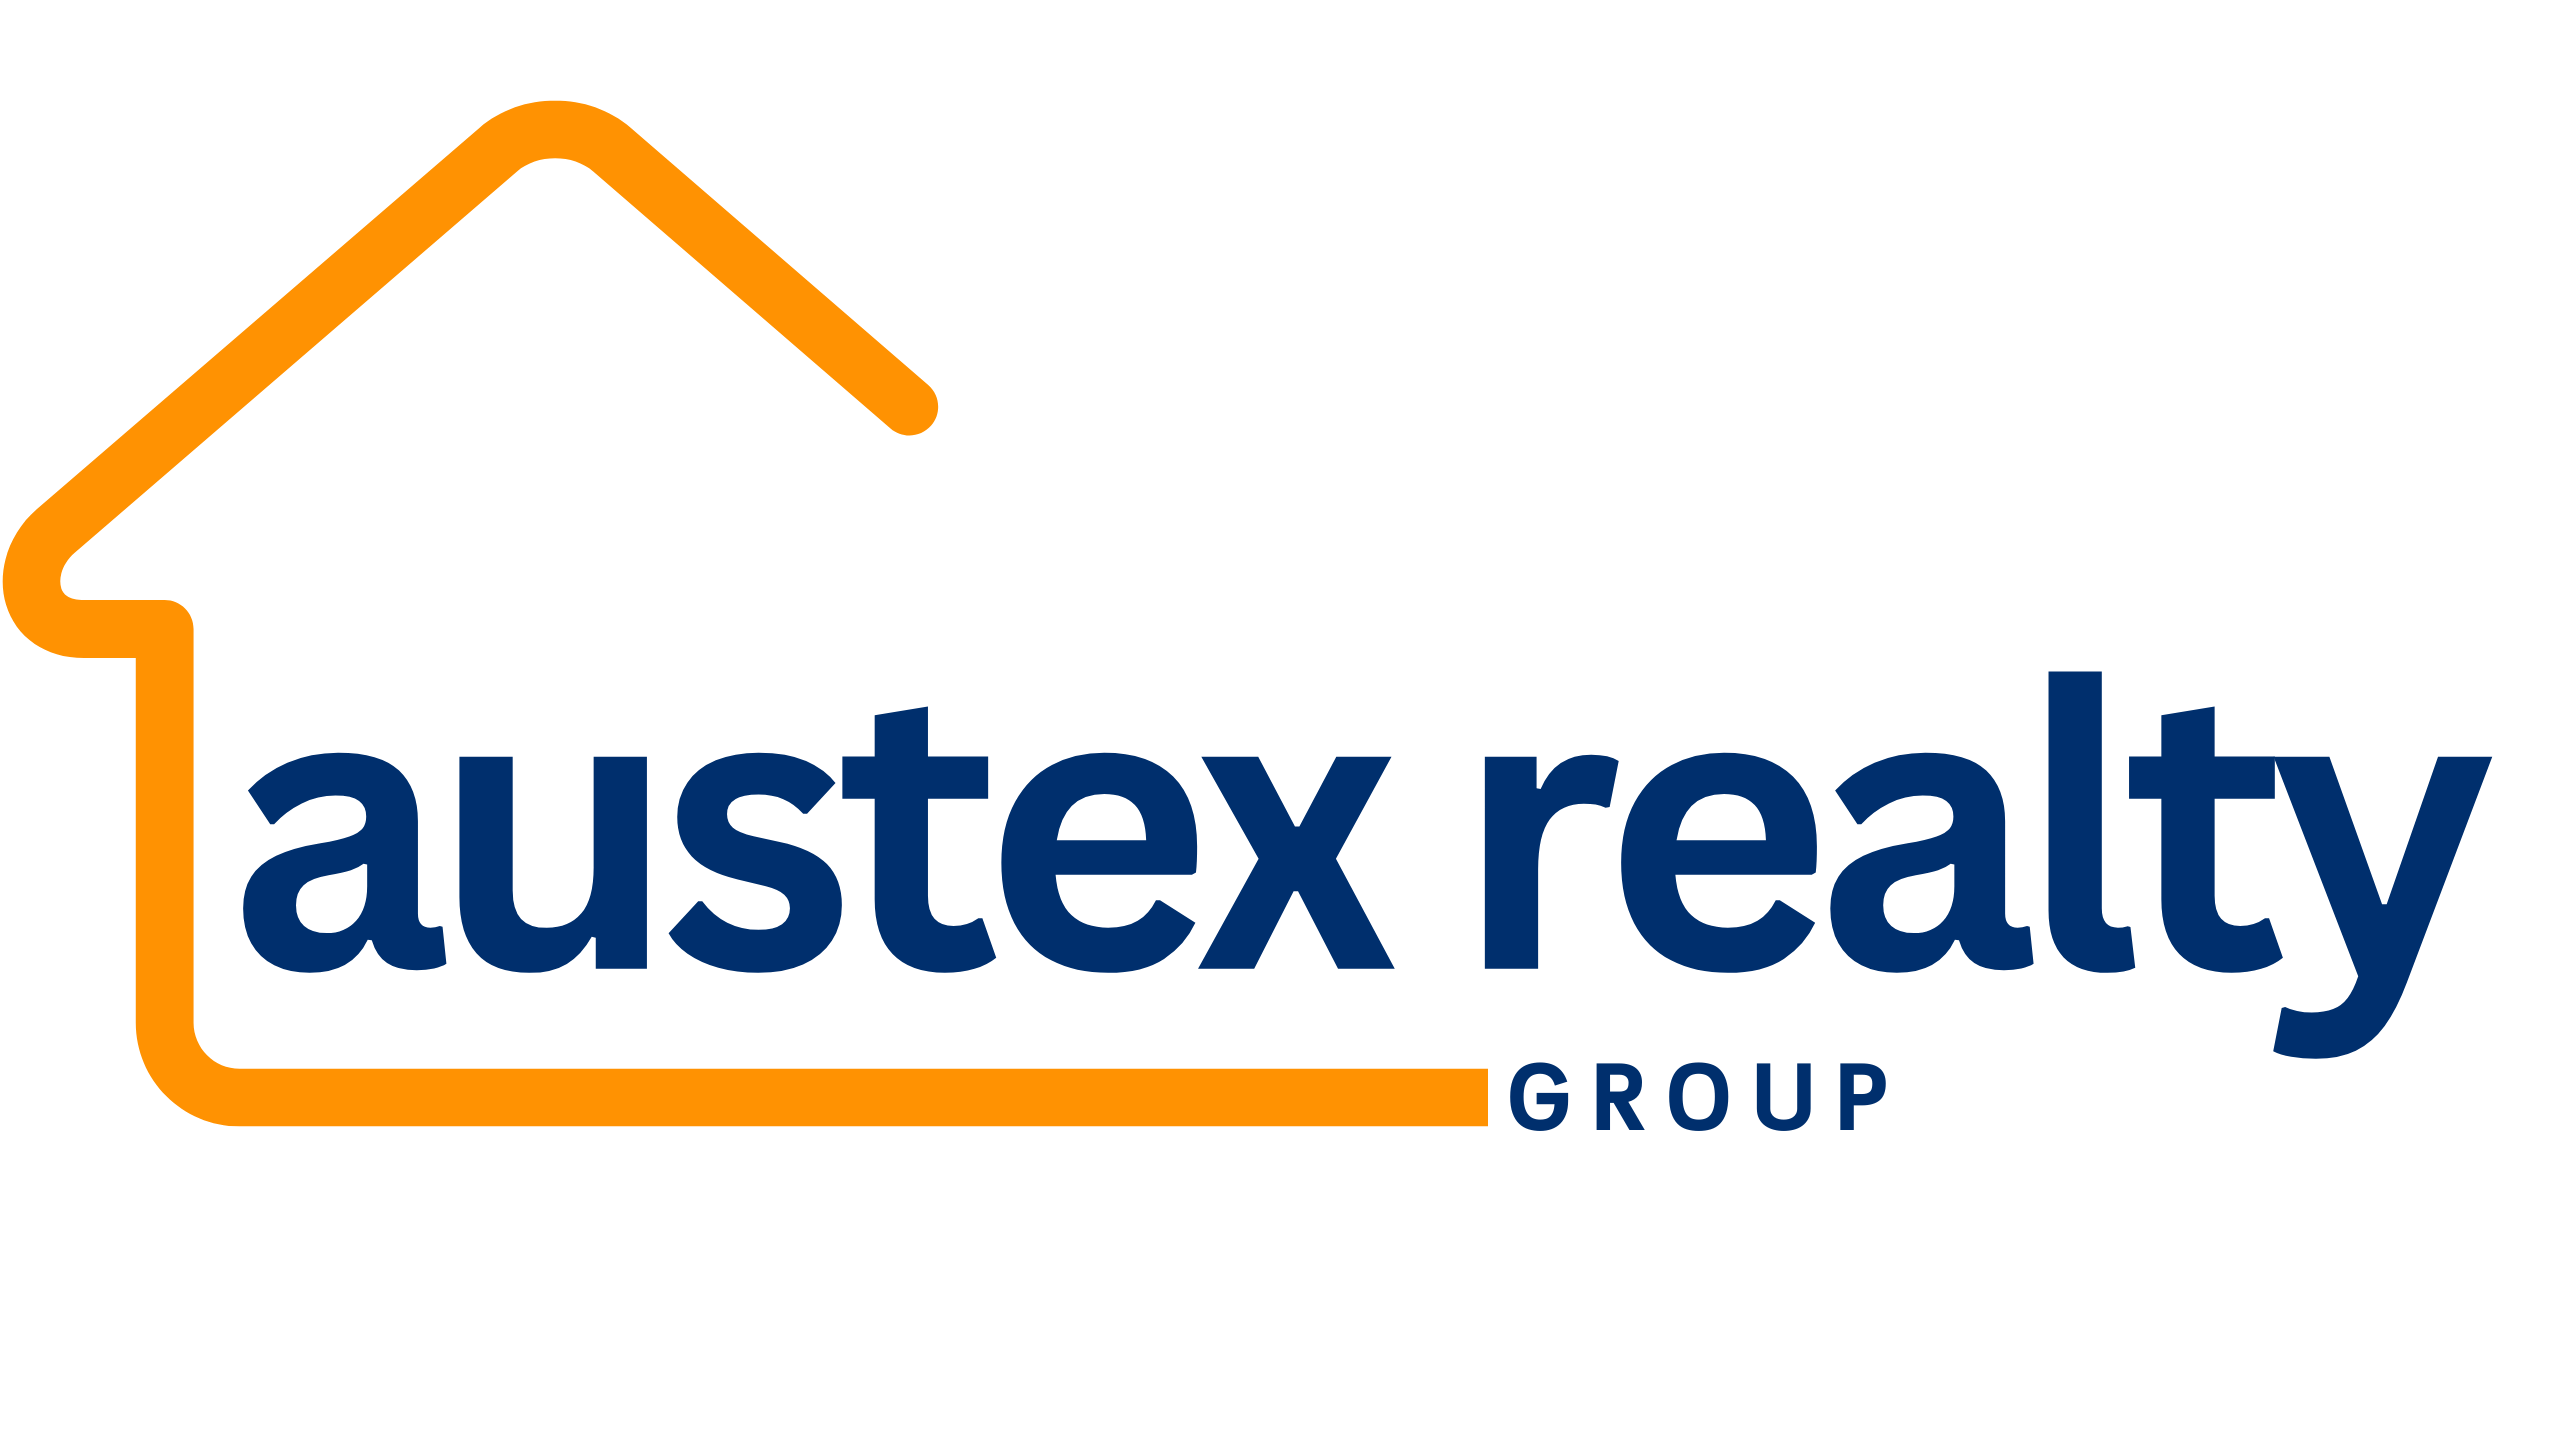 Austex Realty Group